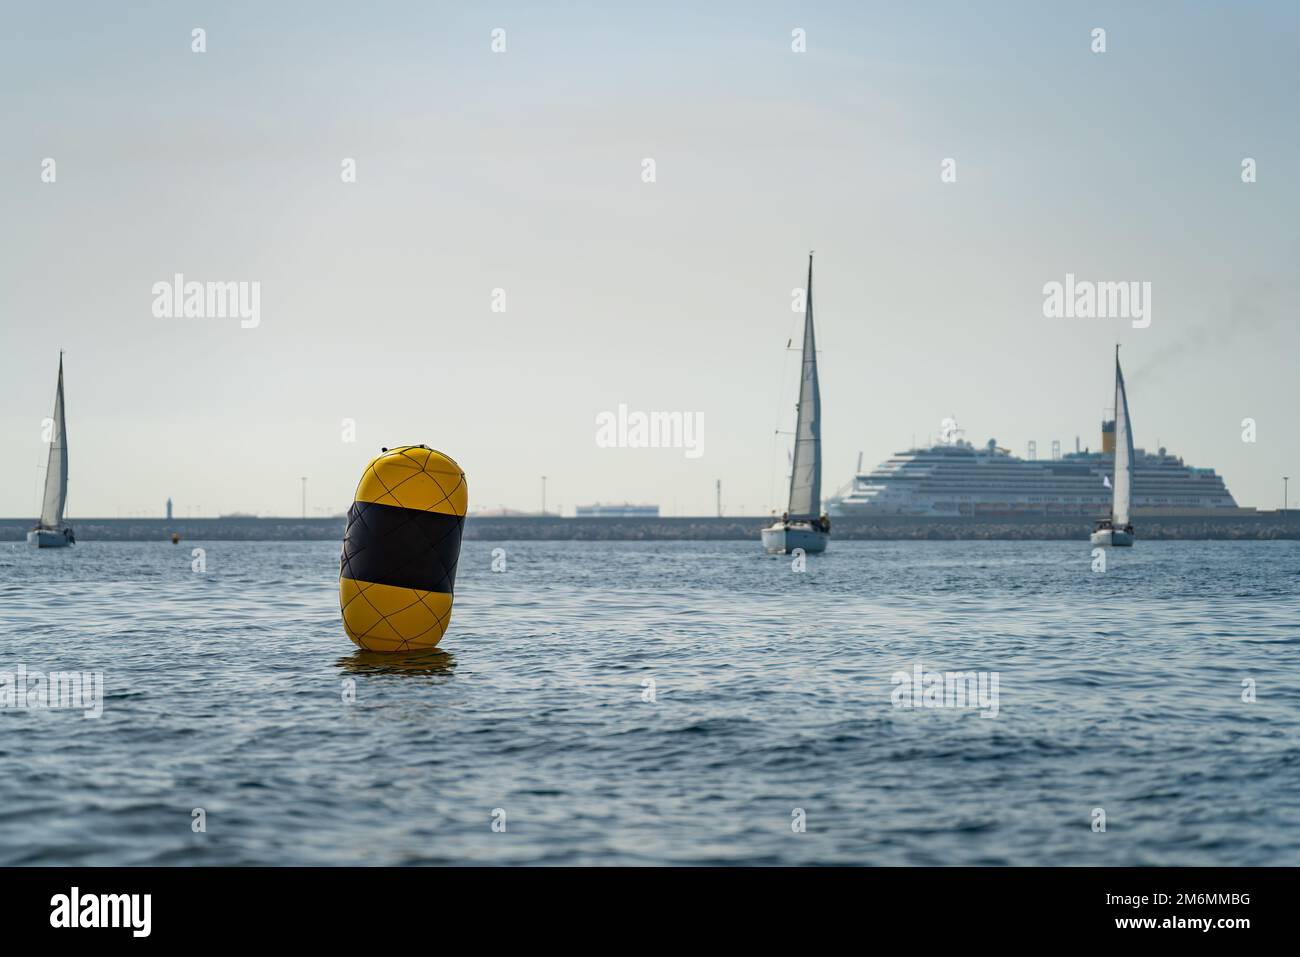 Yellow buoy, blurred sailing ships and passenger ferry in the background Stock Photo